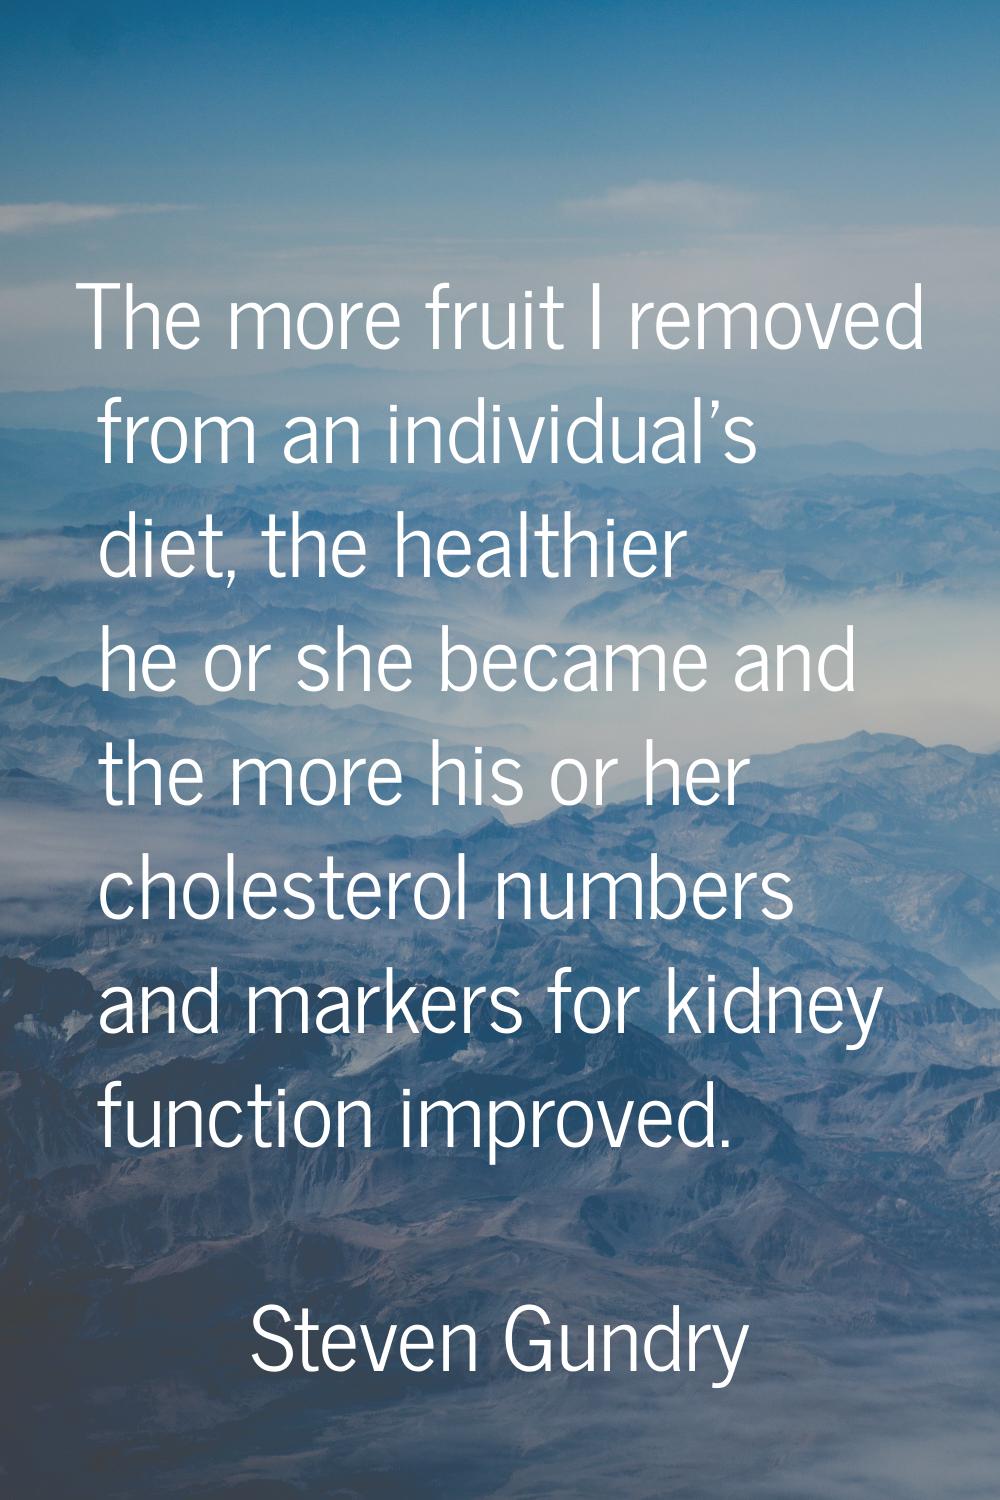 The more fruit I removed from an individual's diet, the healthier he or she became and the more his